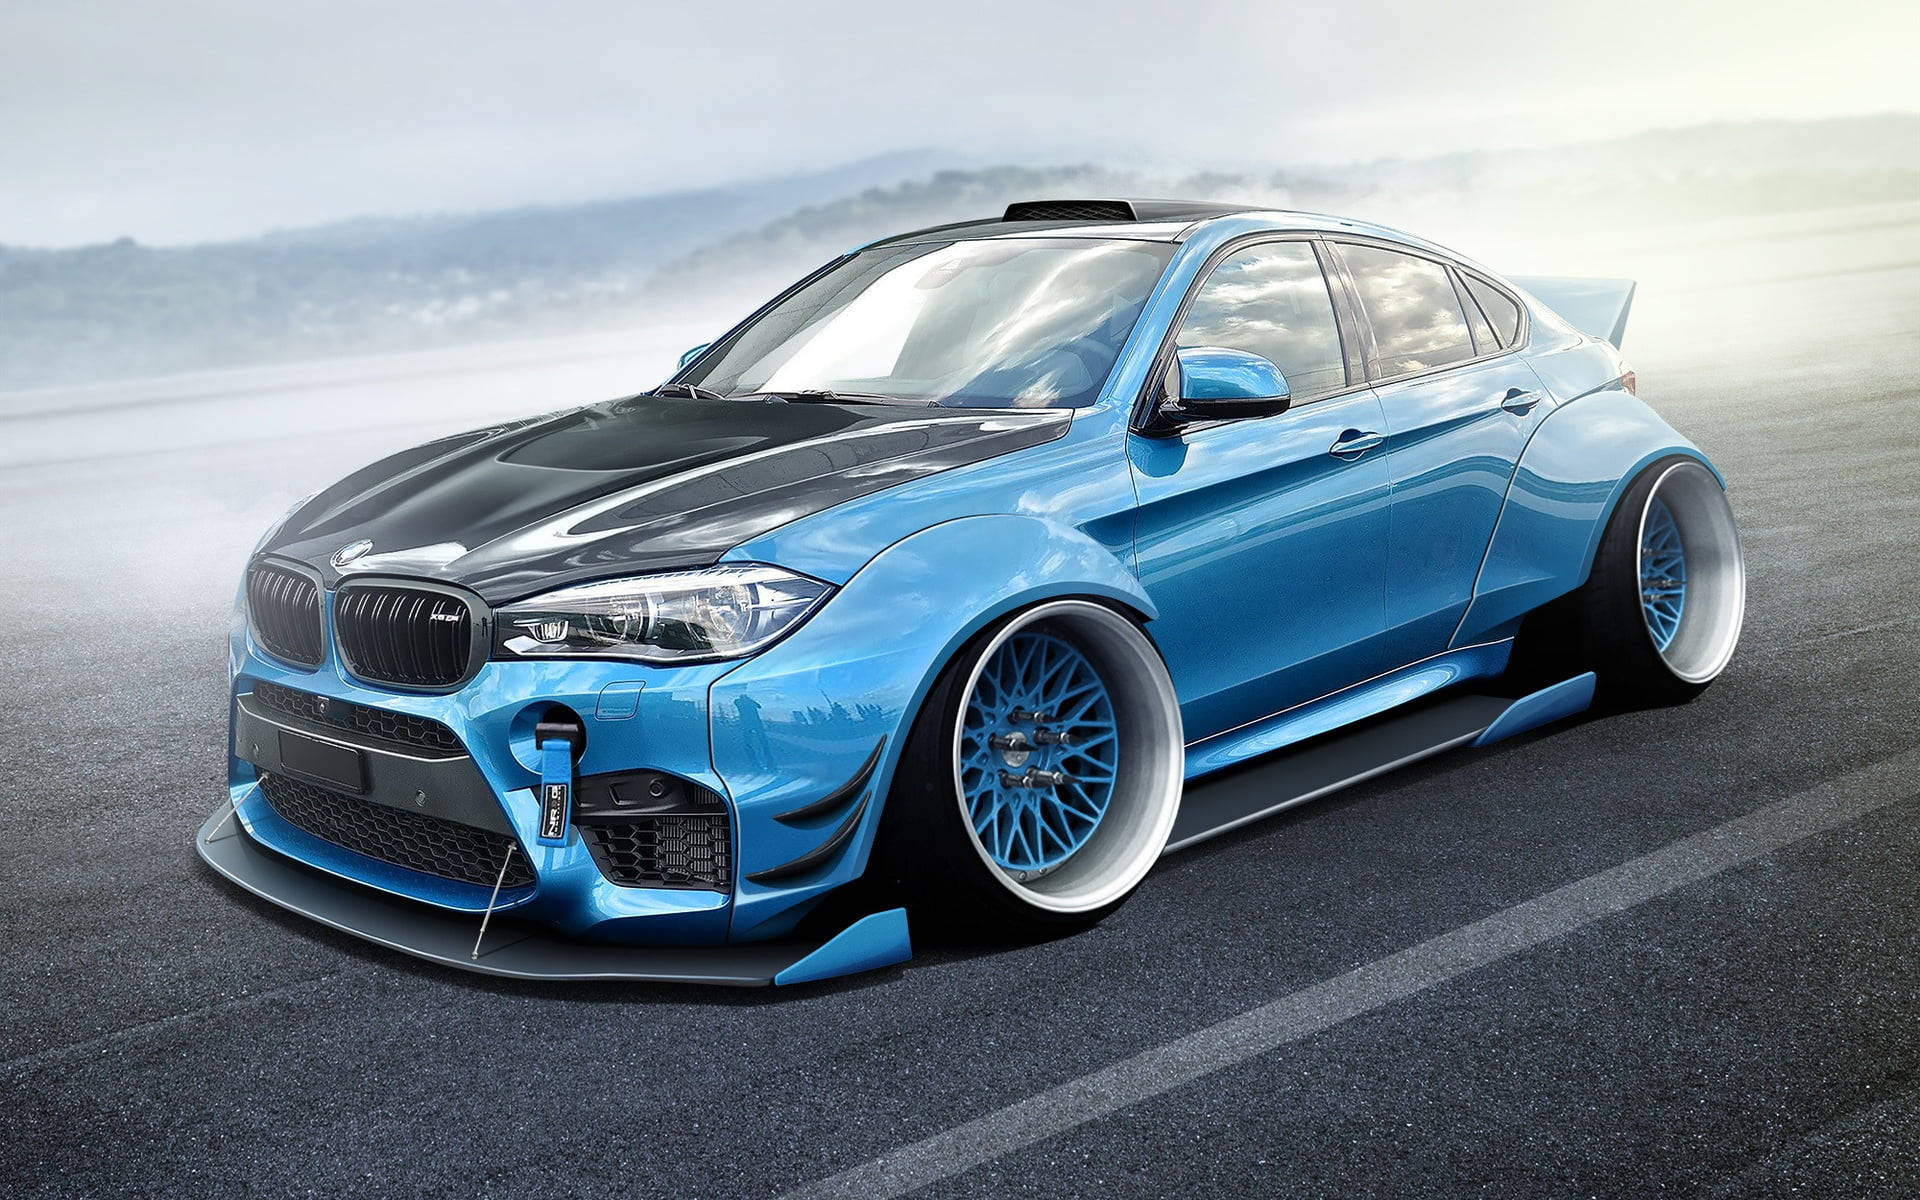 Majestic BMW X6 M in Icy Blue Color Wallpaper